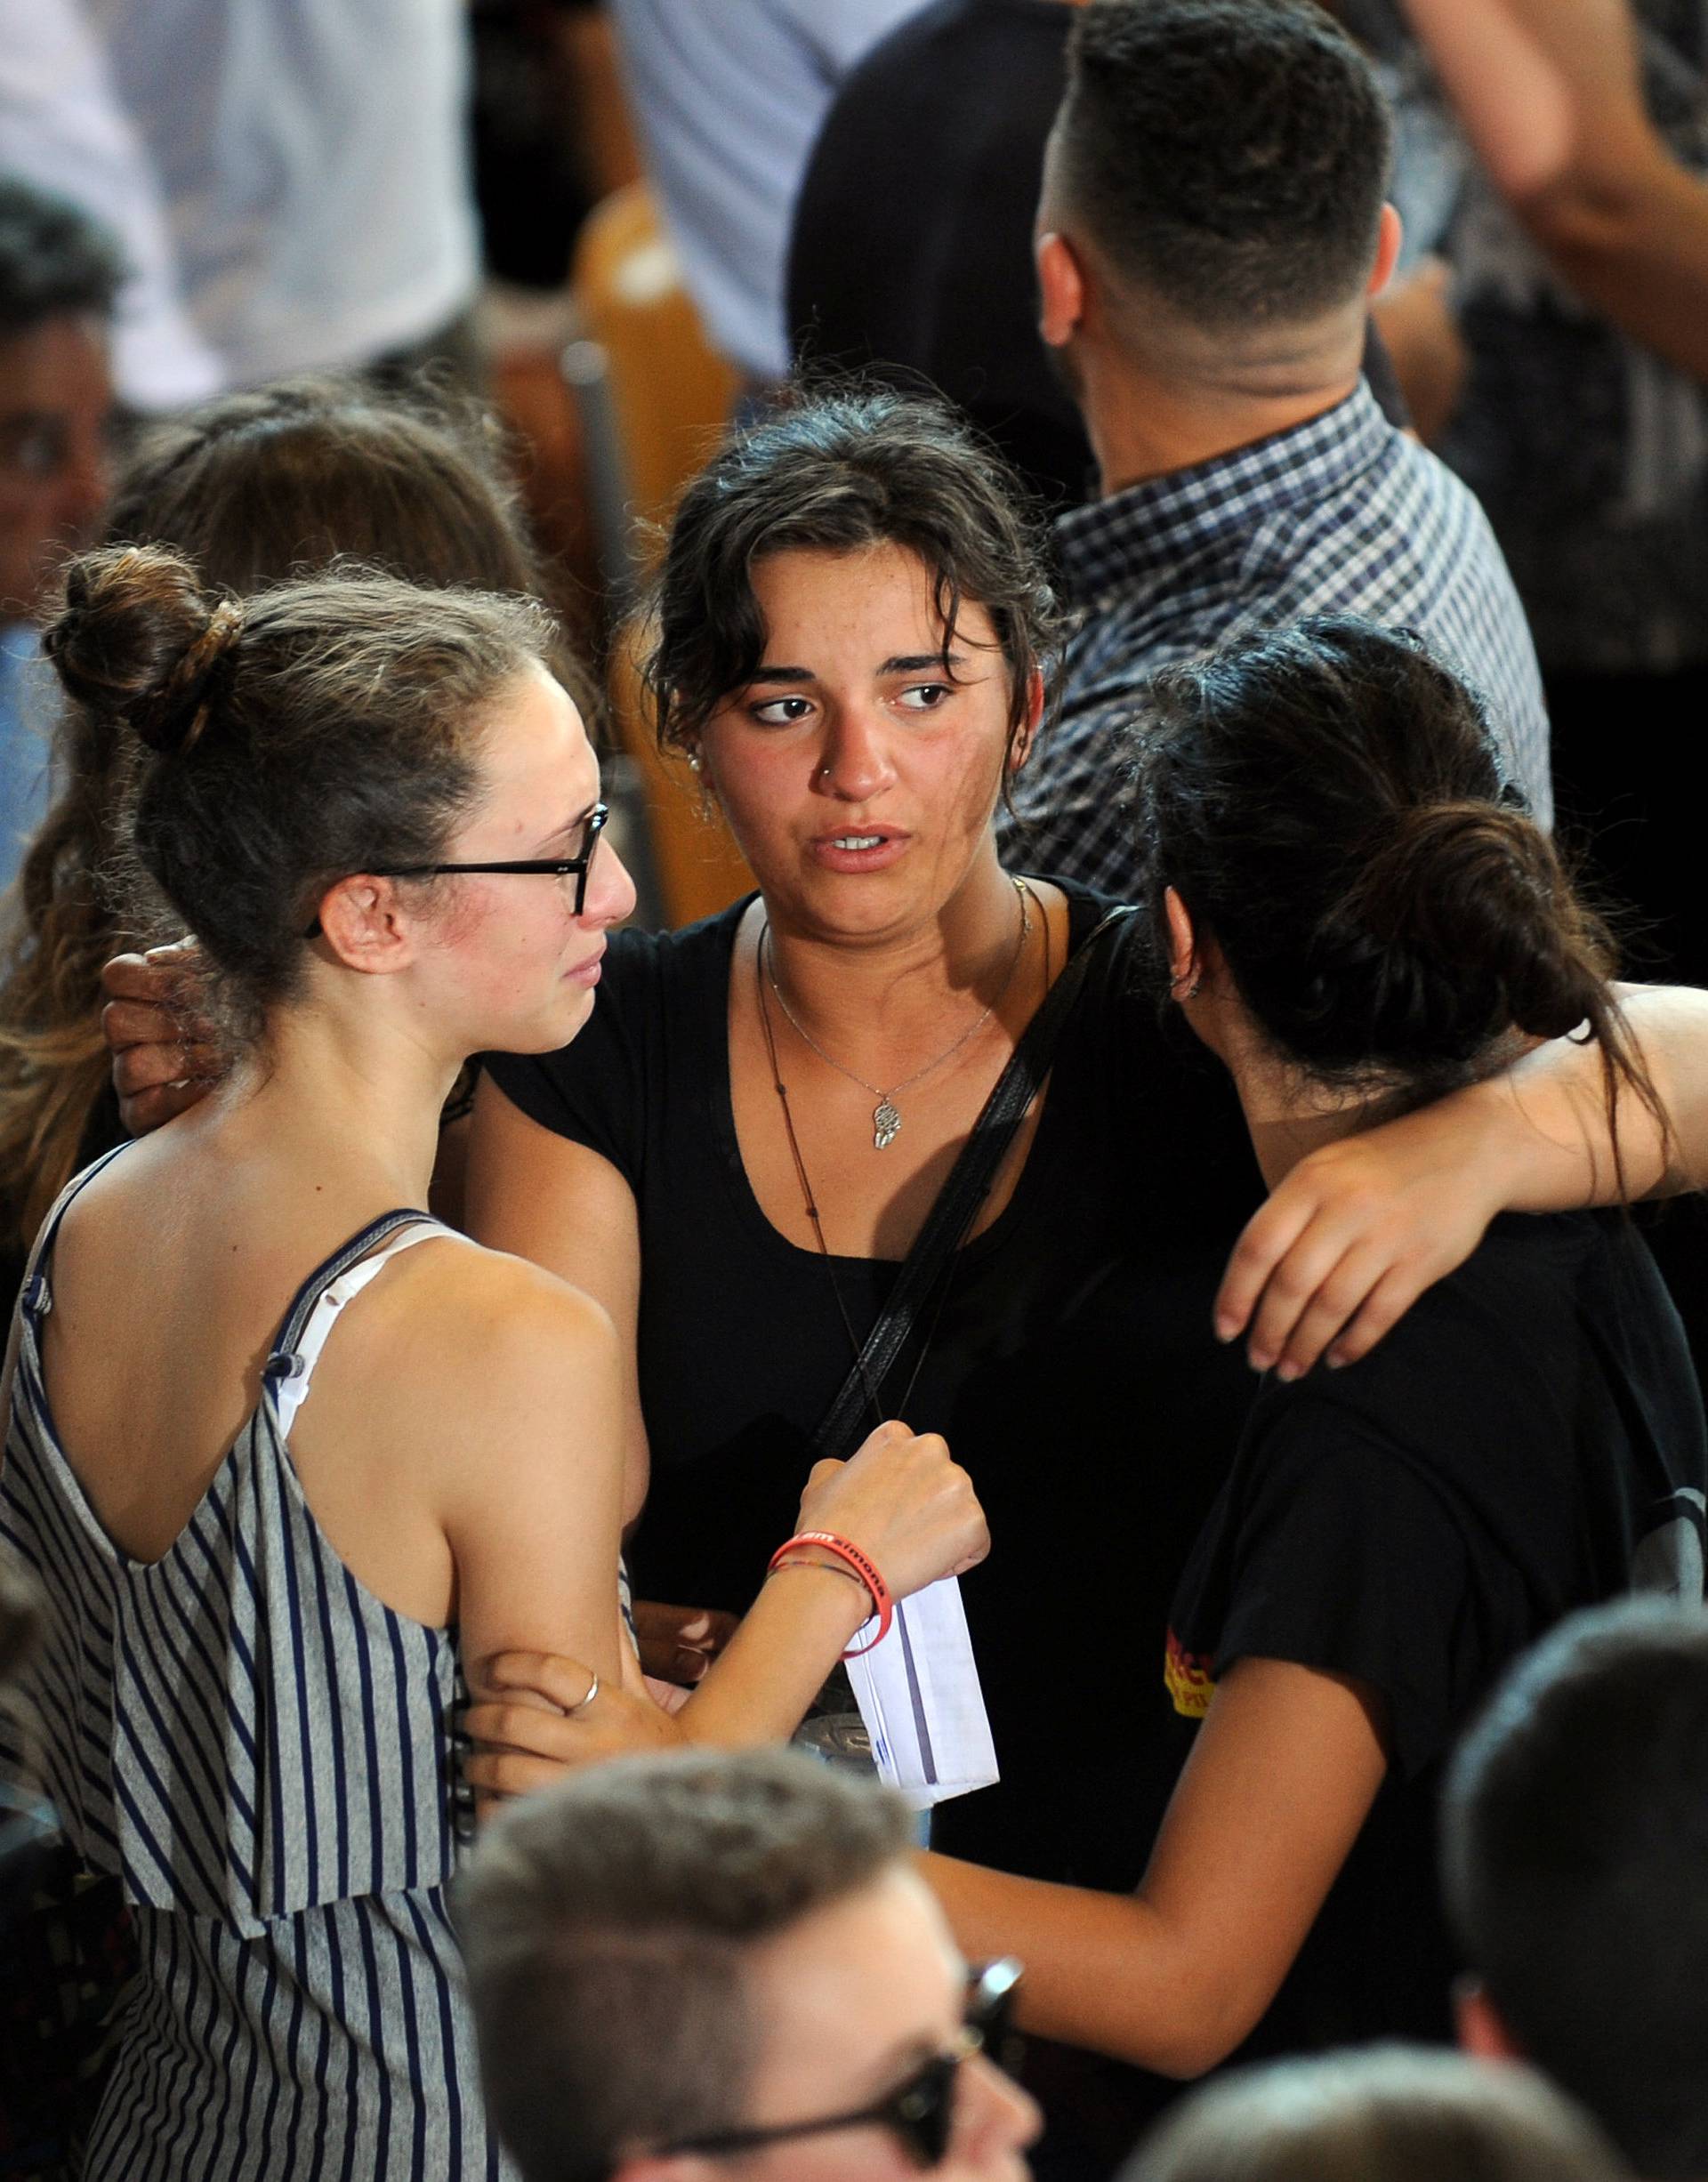 Mourners gather after a funeral service for victims of the earthquake inside a gym in Ascoli Piceno, Italy